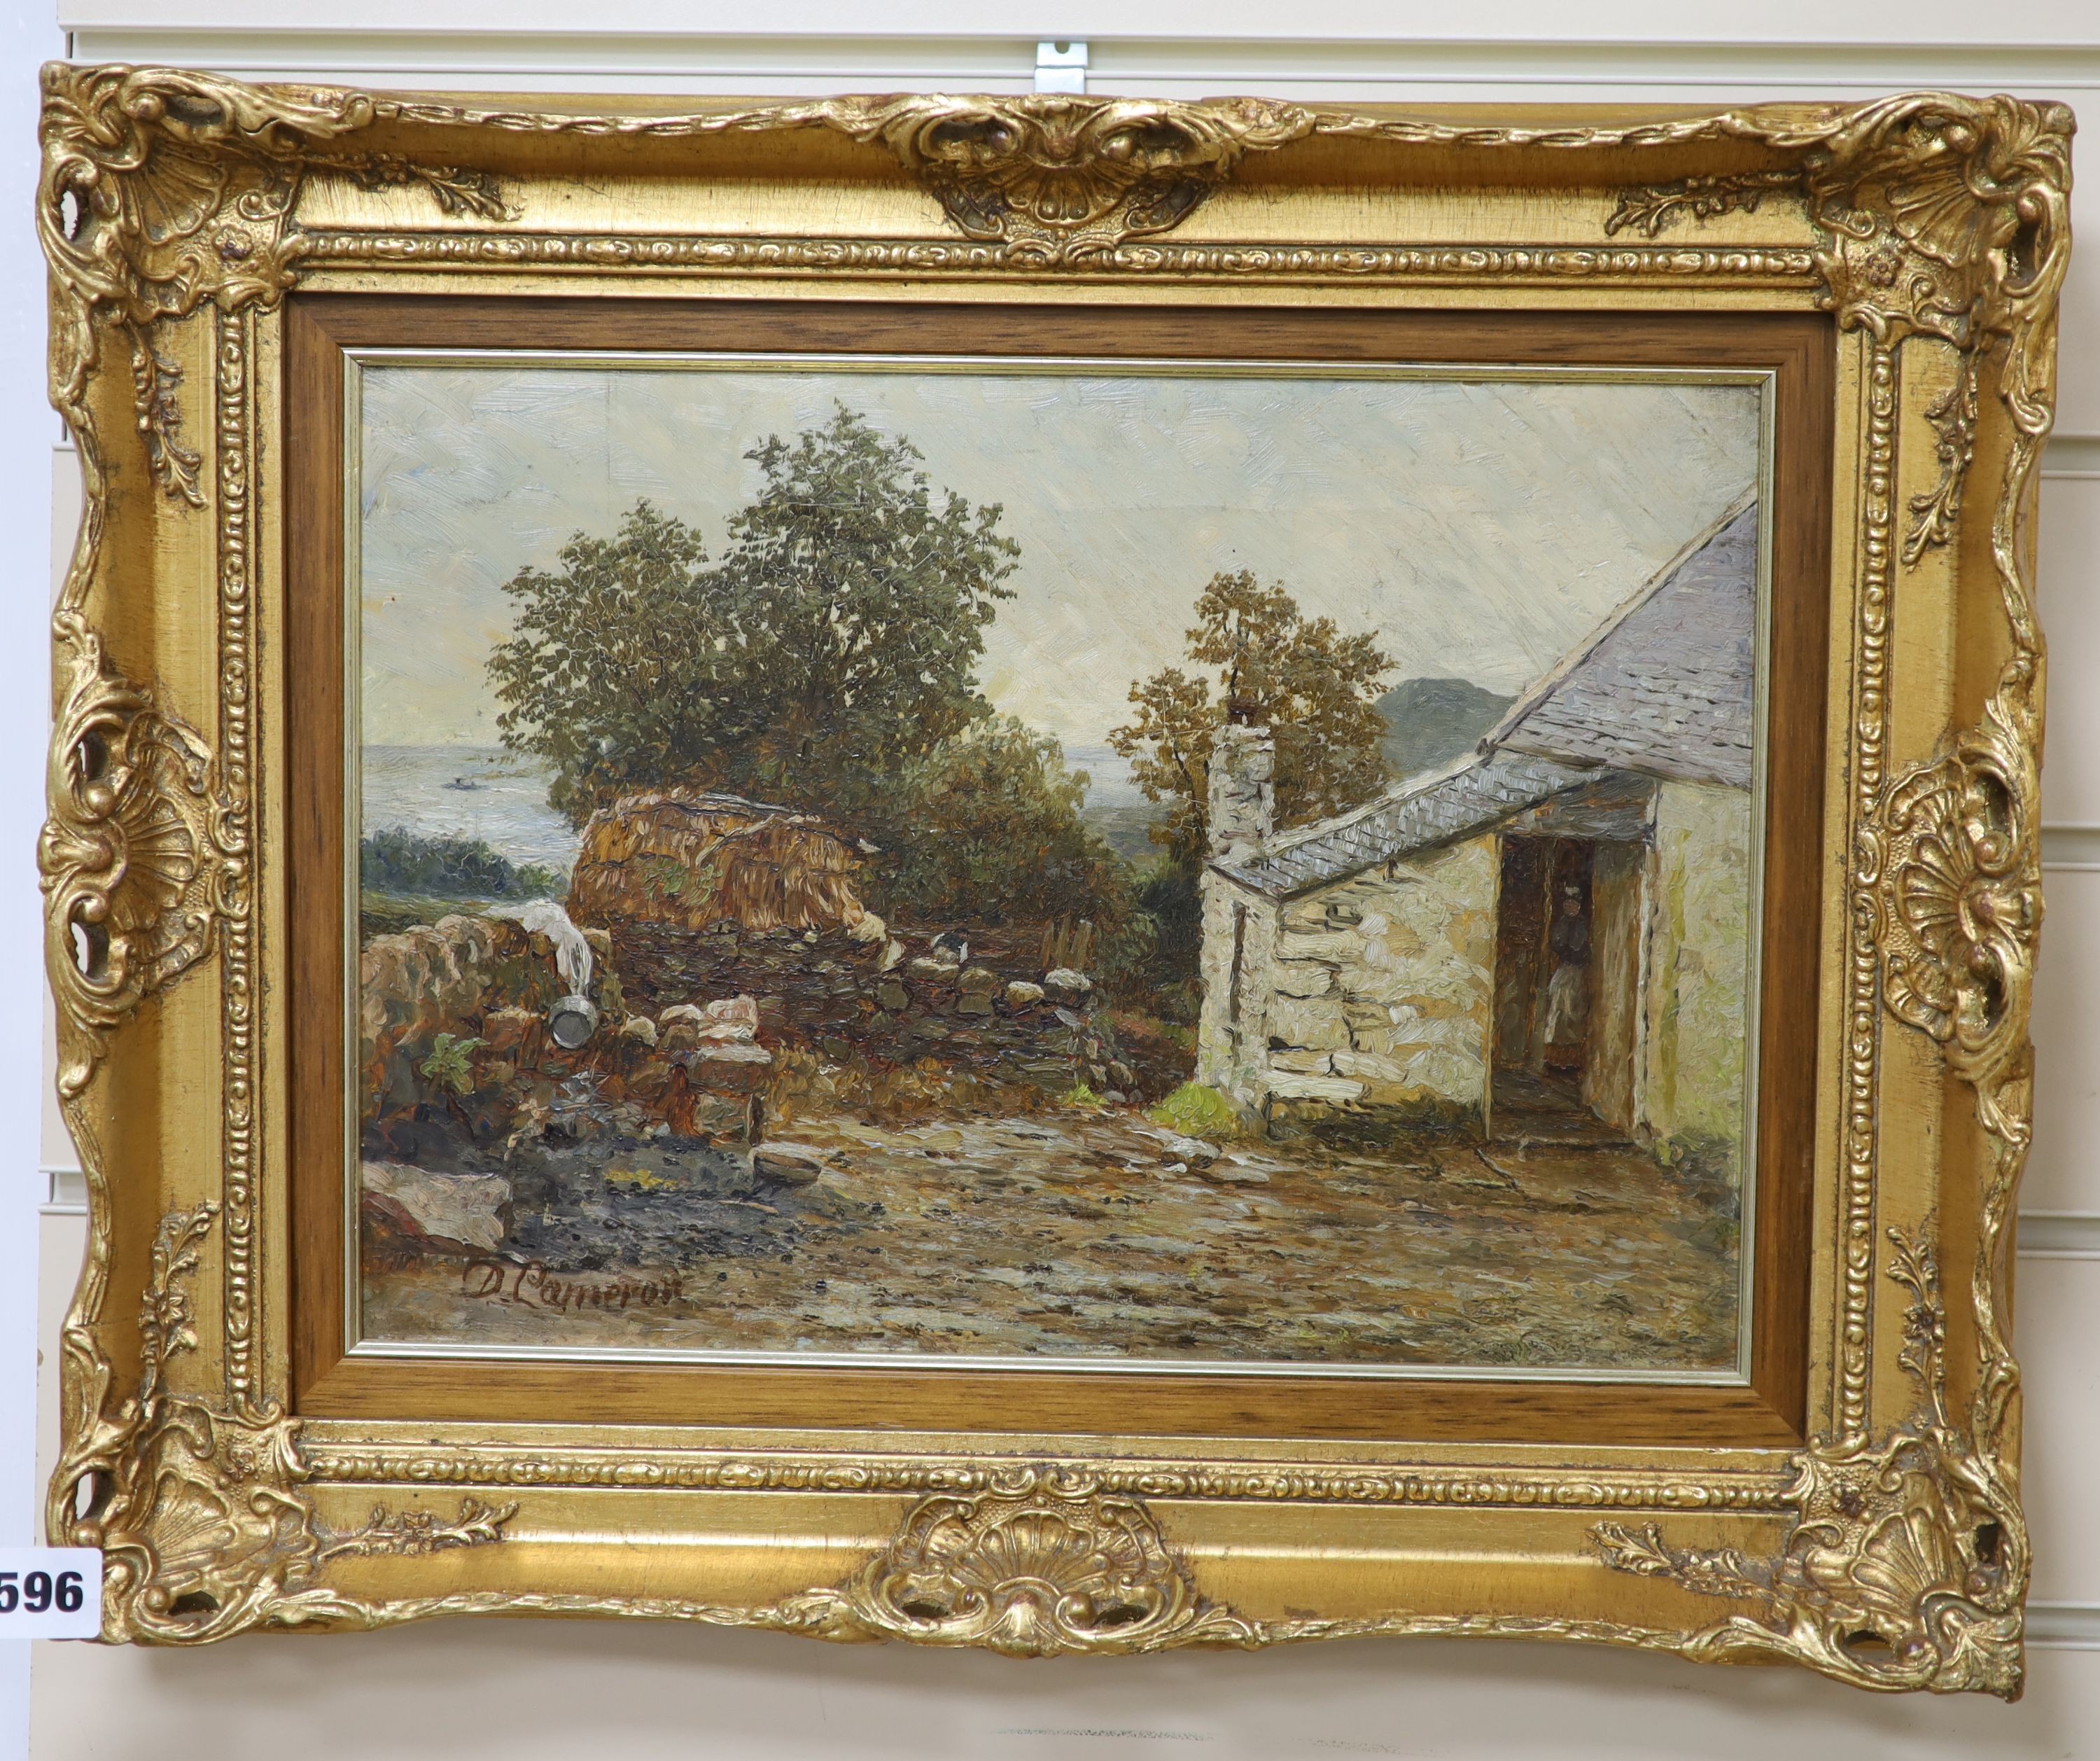 Duncan Cameron (1837-1916), oil on canvas, Study at a farm, signed and inscribed verso, 26 x 36cm